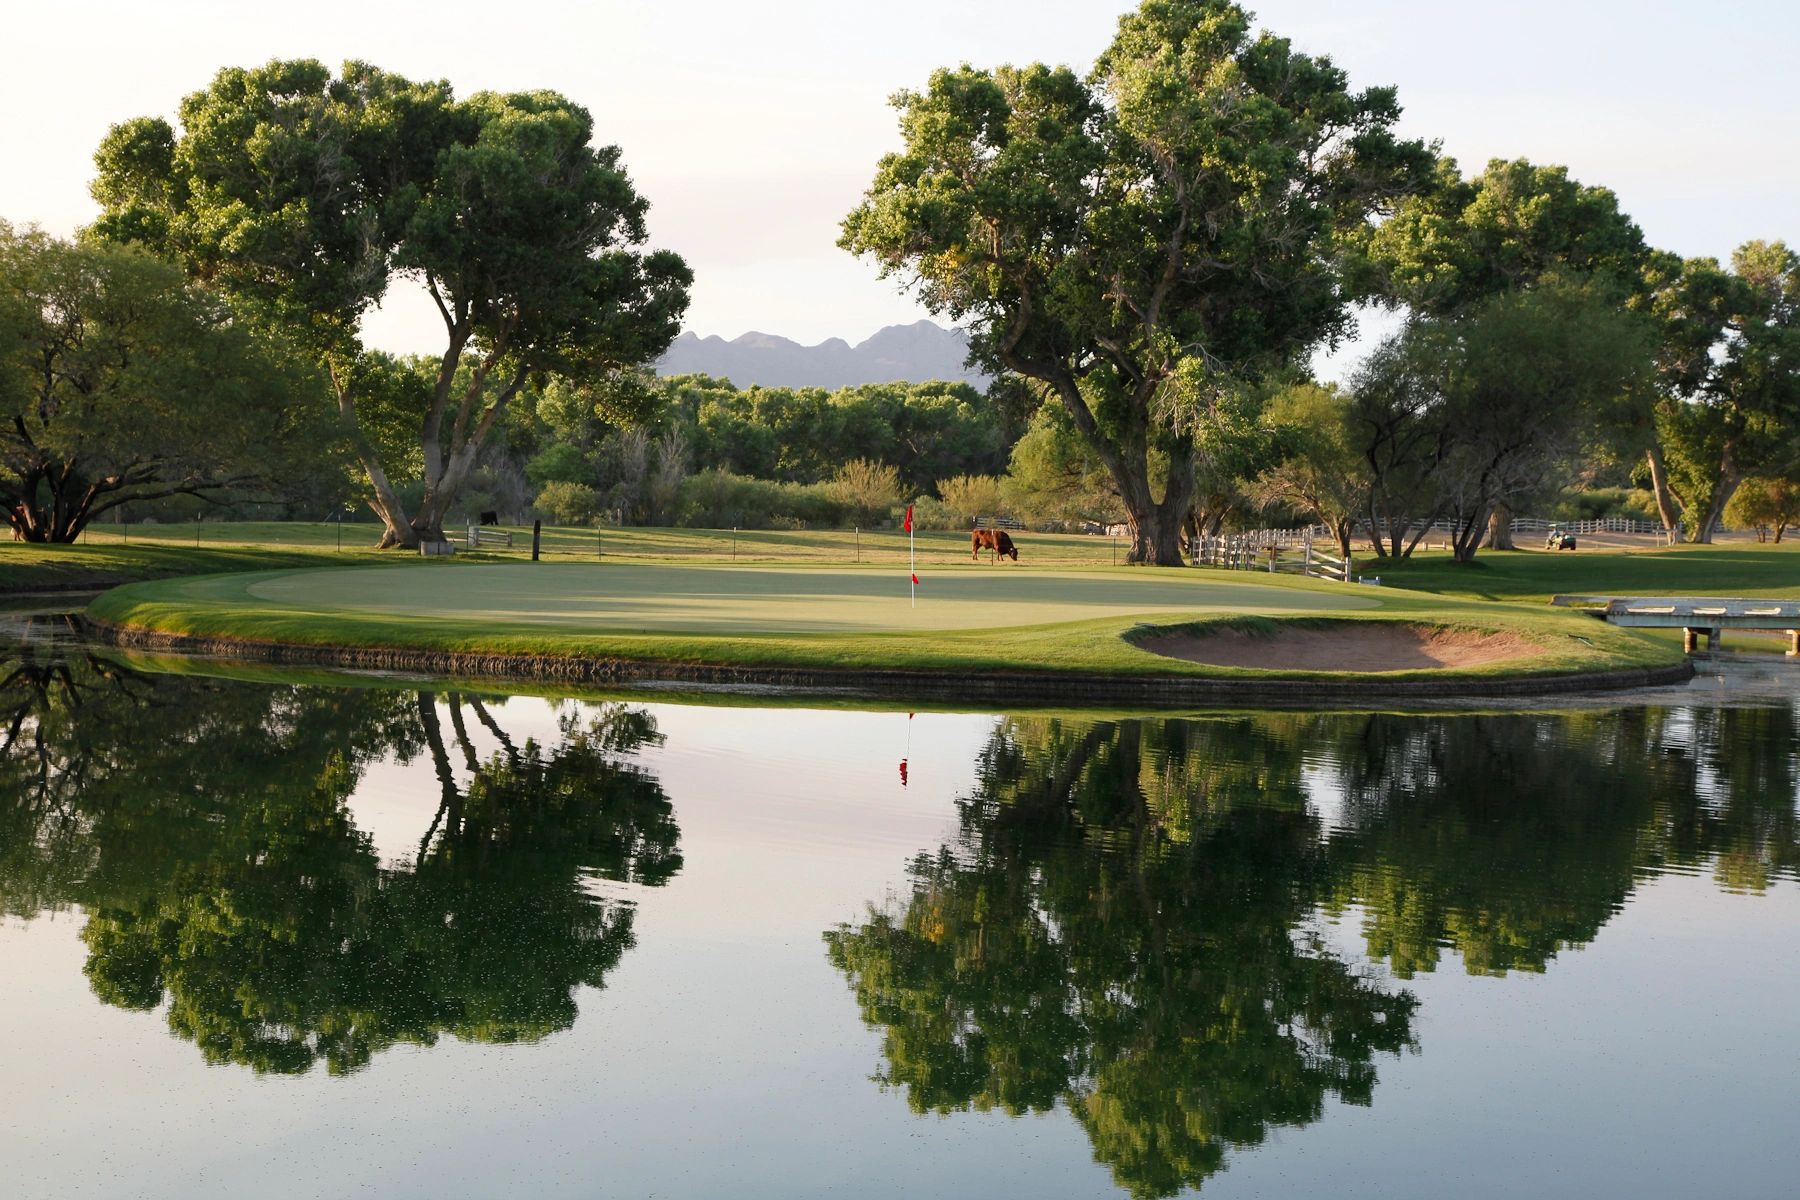 Tubac Golf Resort has 27 holes of golf, pickle-ball/tennis, and access to
hiking the  Anza Trail.